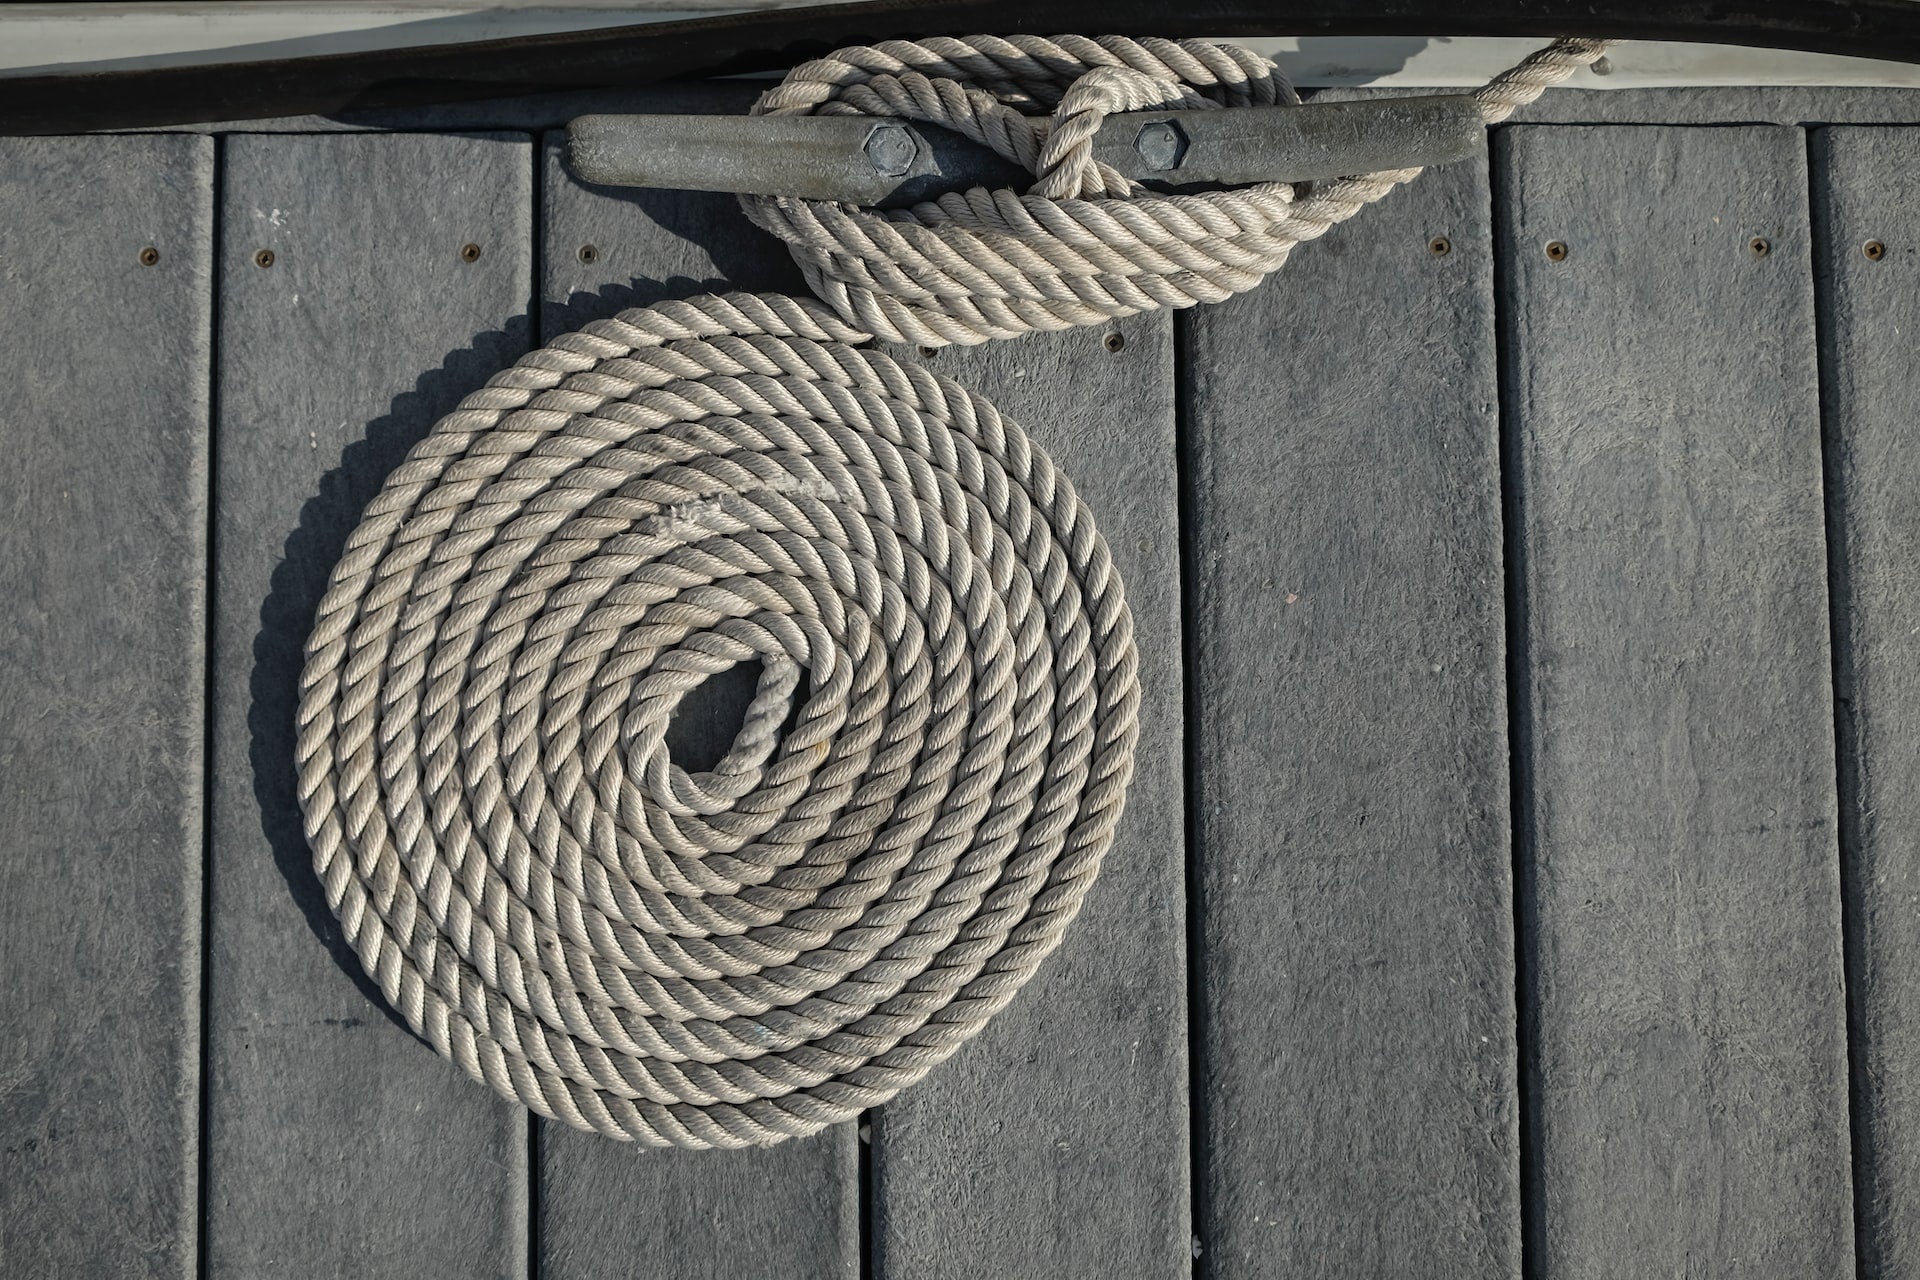 Prevent Dock Line Chafing and Know When to Replace Failing Boat Lines –